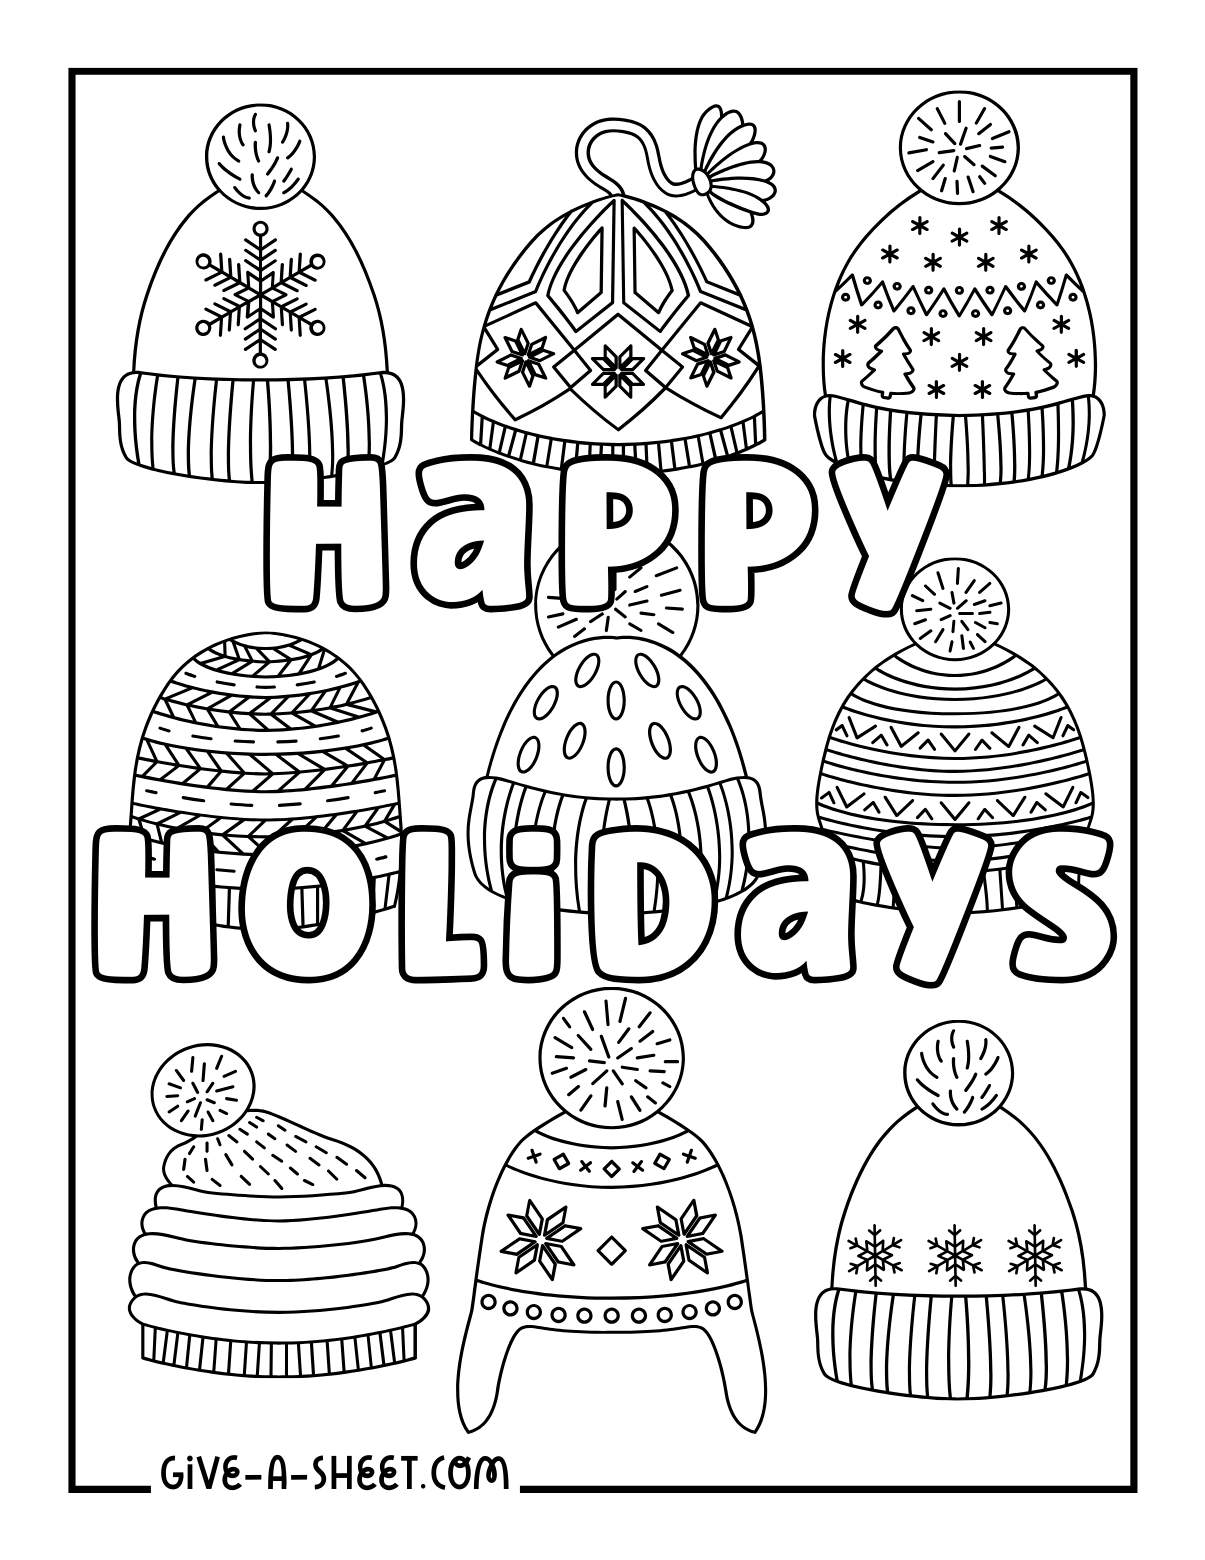 Cable knit winter hats coloring page.